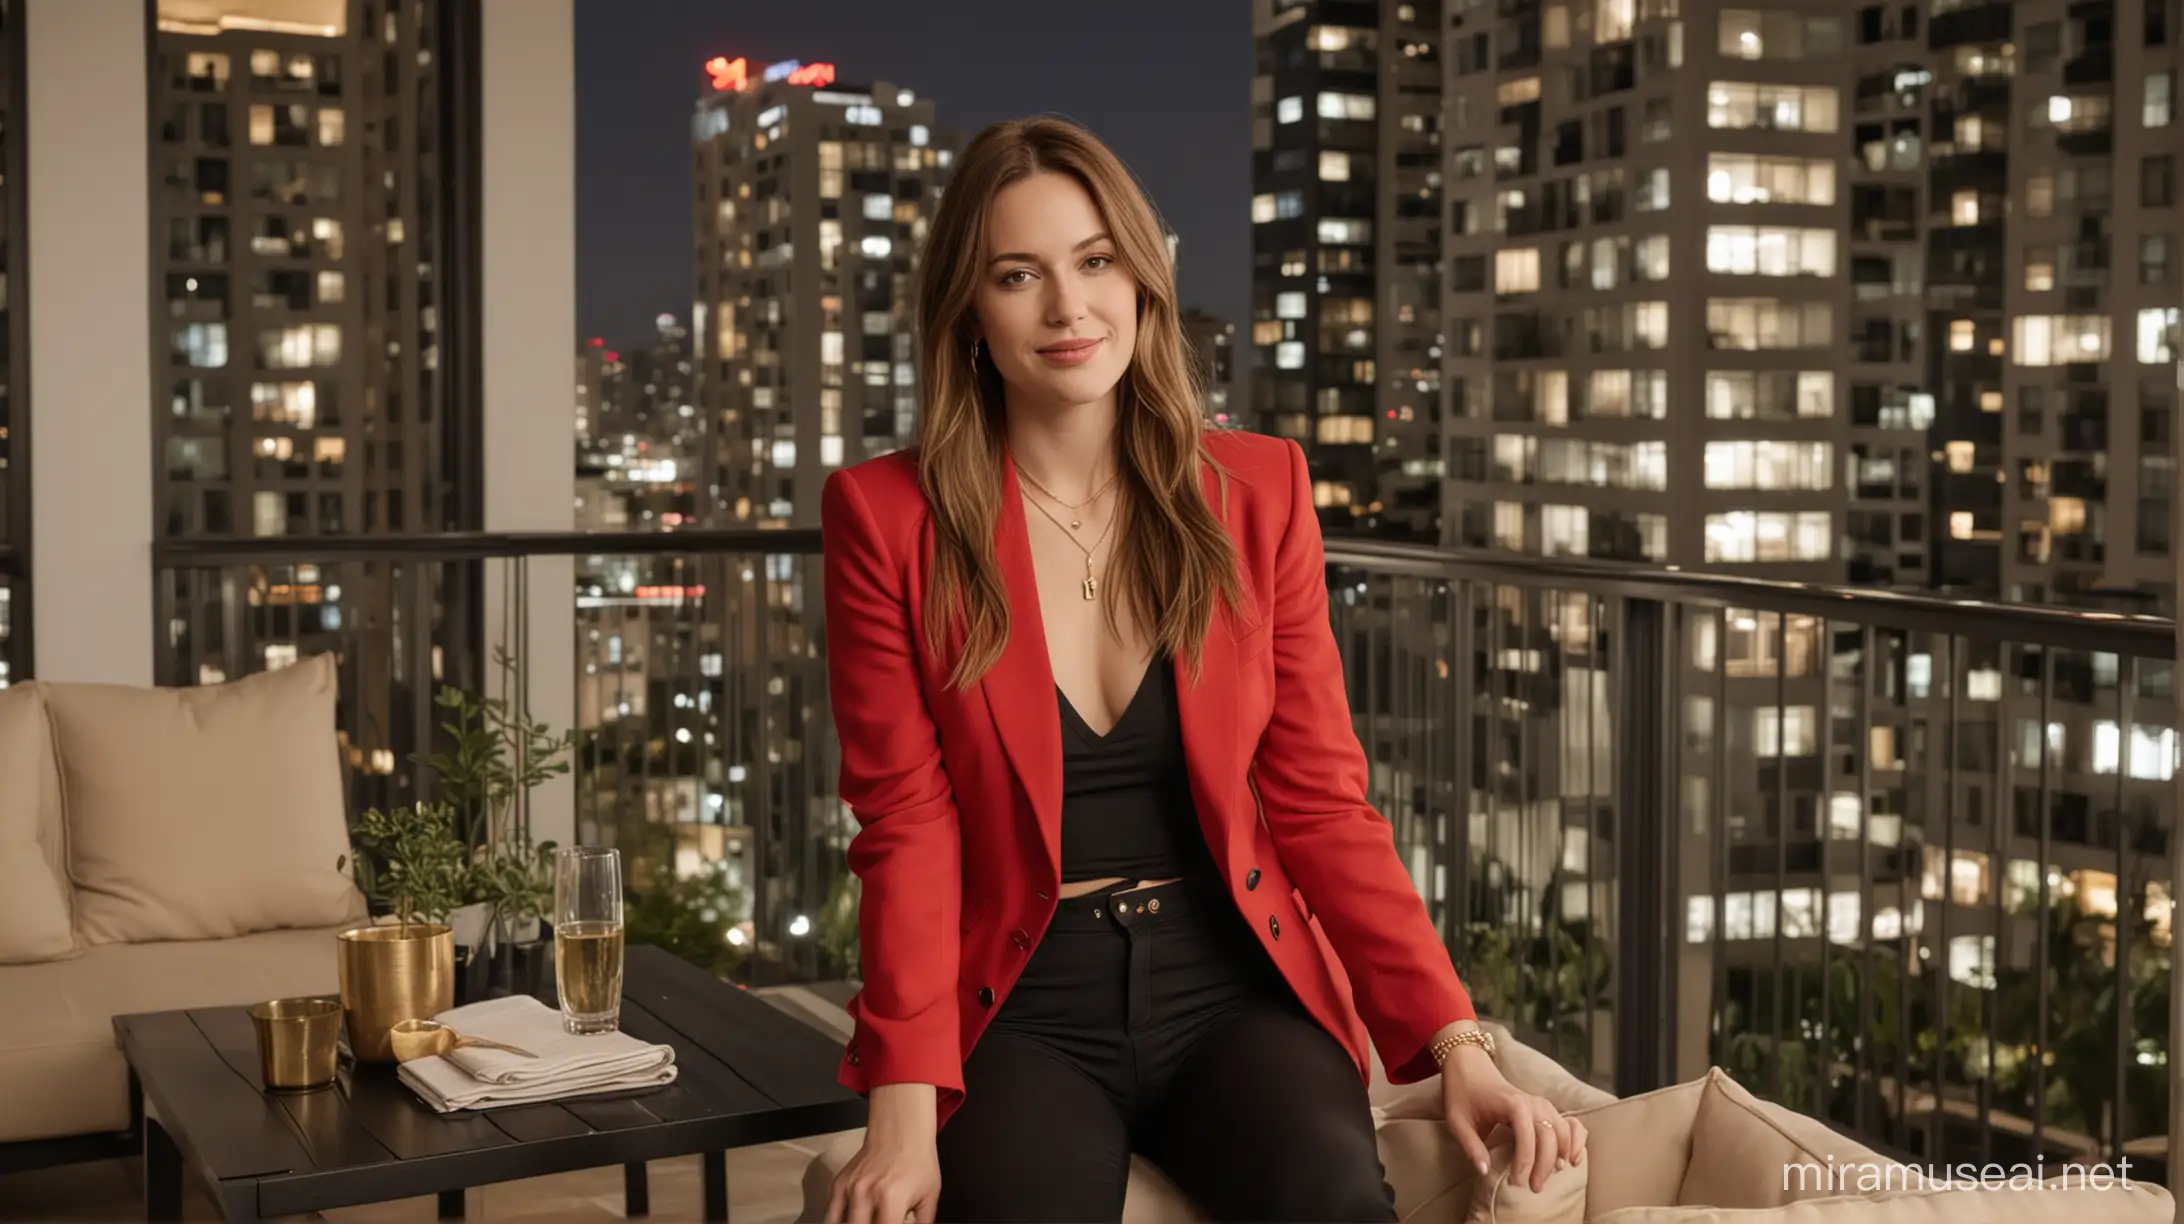 30 year old white woman sitting on patio furniture on a balcony, modern high rise apartment background in the evening. She has long brown hair, pale skin, wearing a red blazer, gold necklace with very low cut black shirt and black pants.